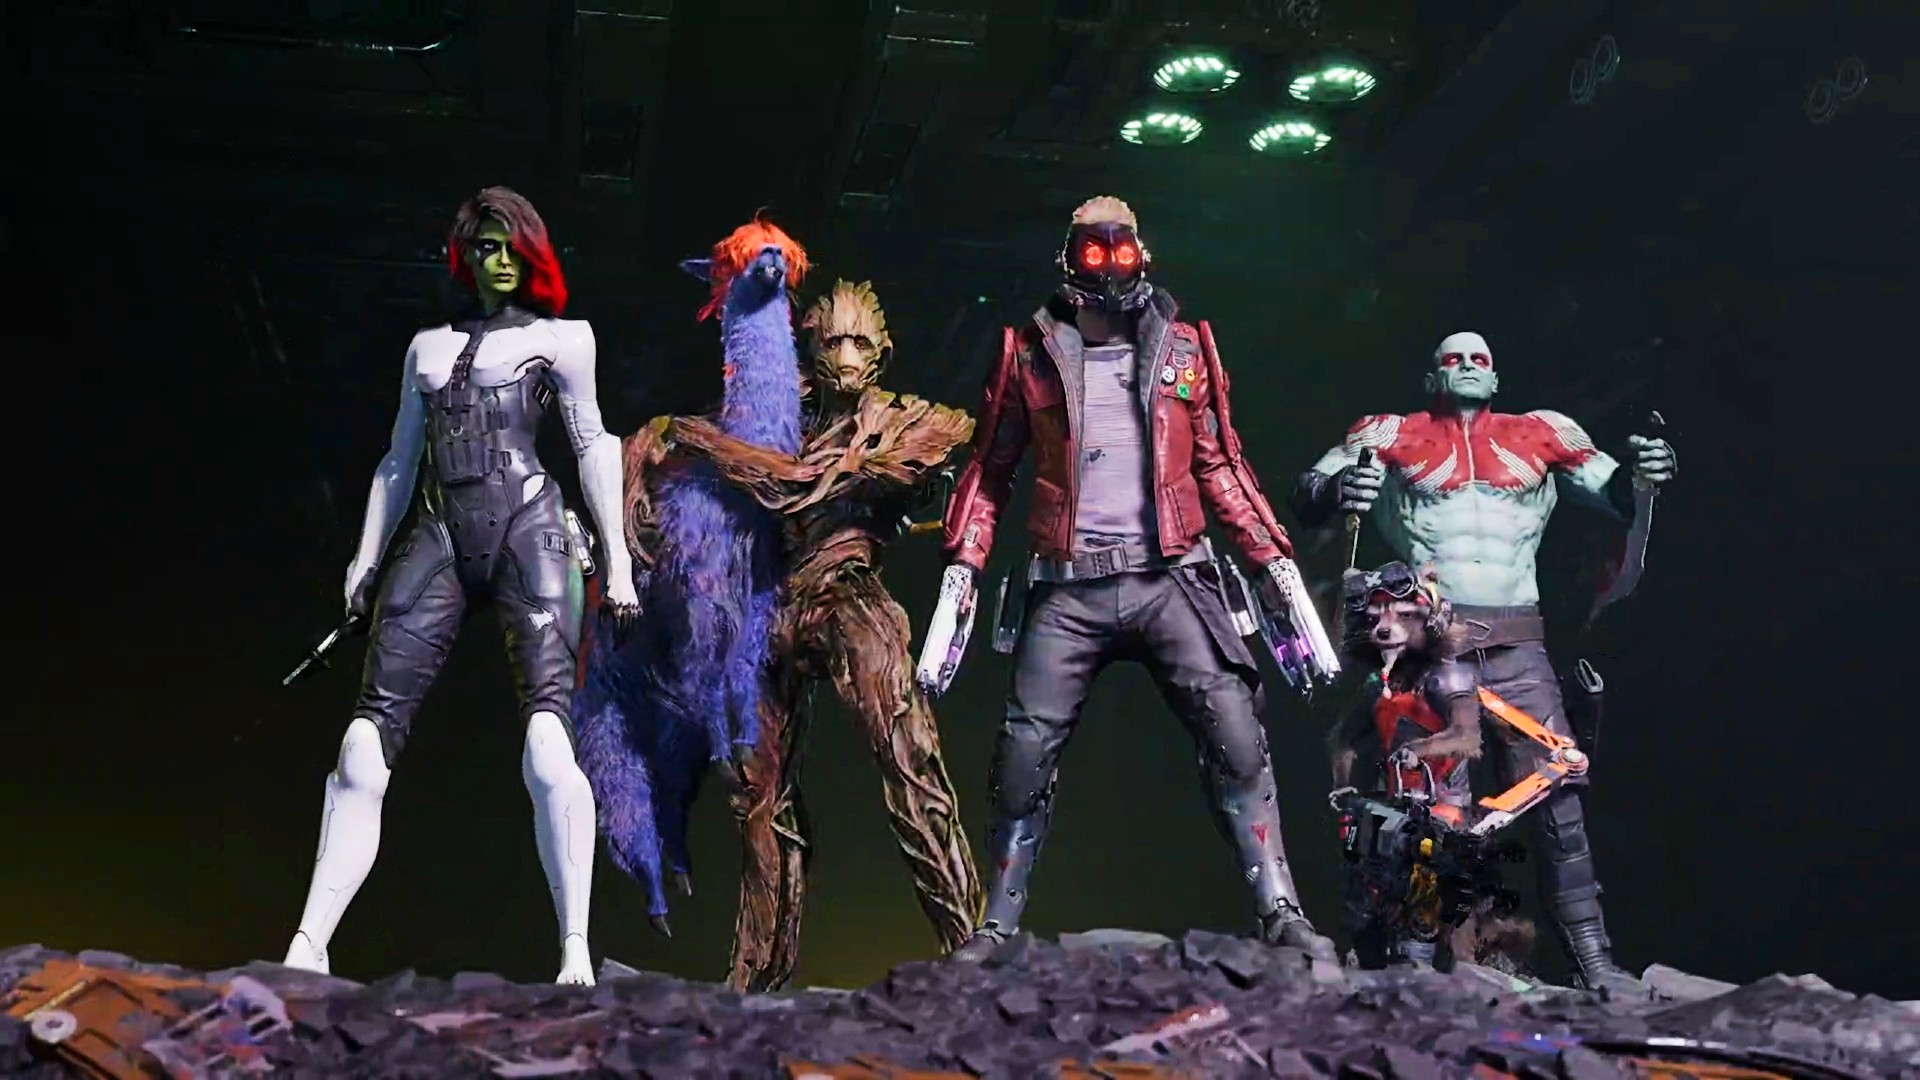 Guardians of the Galaxy is a single-player action game from the Deus Ex developer